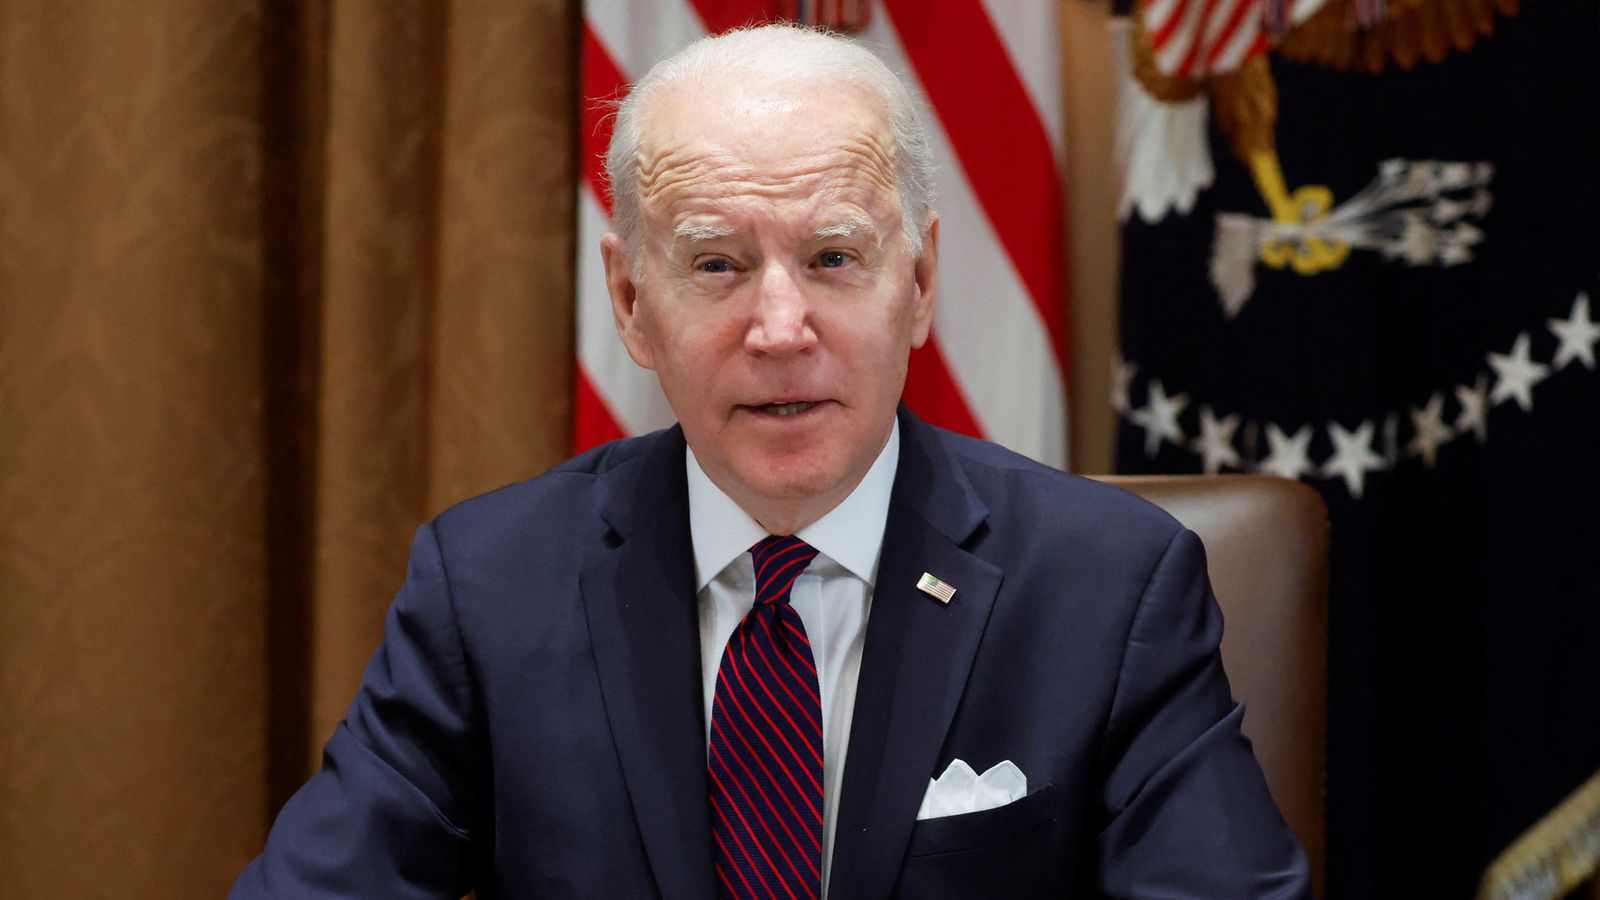 Ukraine: Biden warns Russia 'will pay heavy price' if it invades Ukraine as Truss condemns 'increased aggression' - Sky News